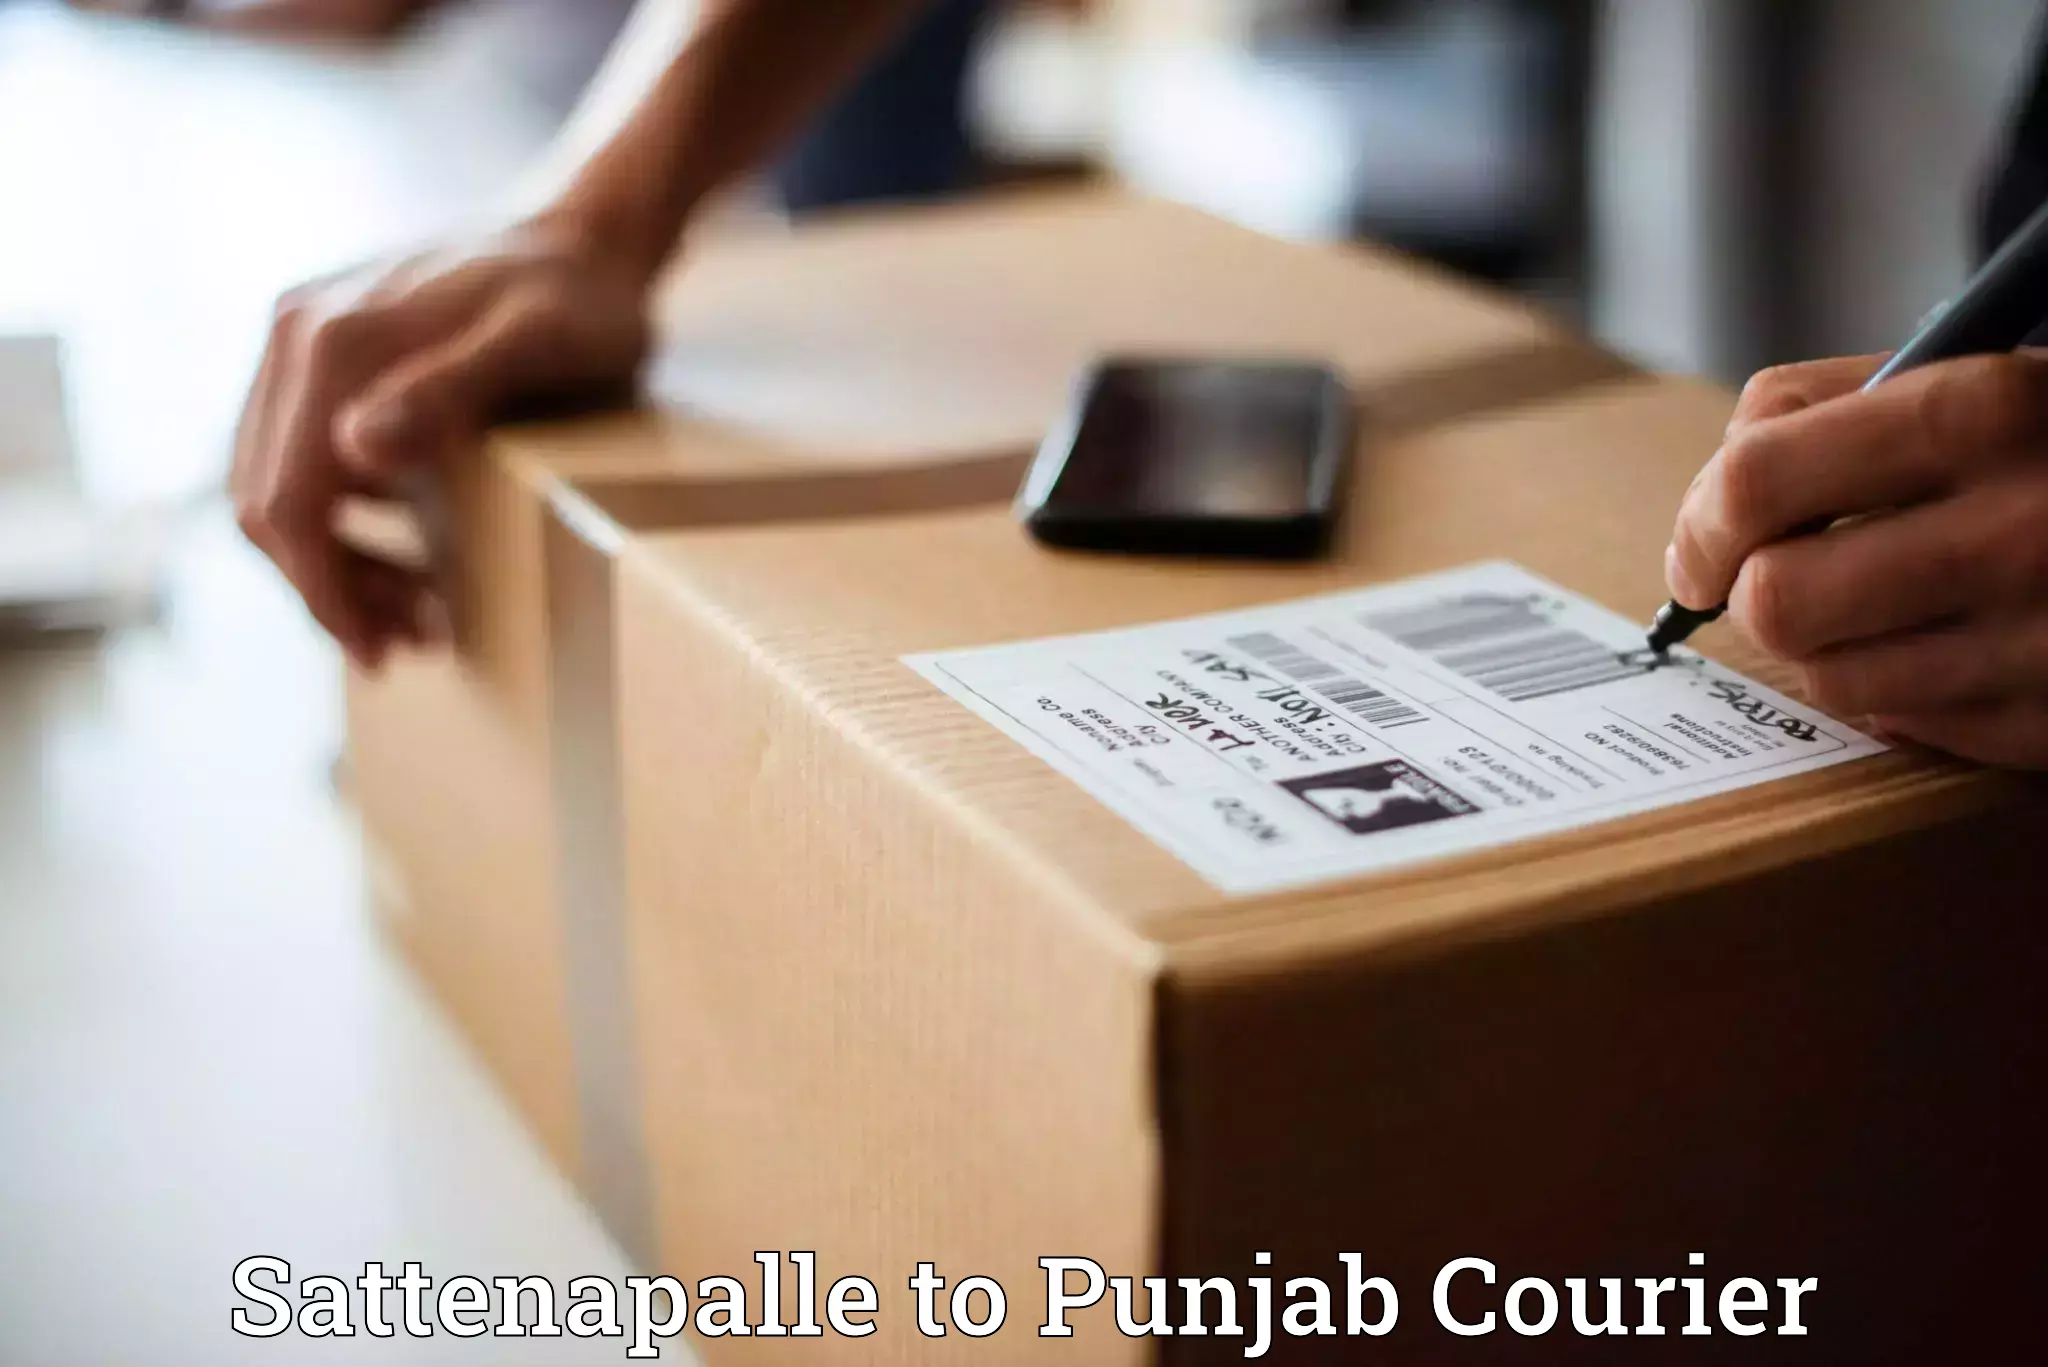 Subscription-based courier Sattenapalle to Anandpur Sahib